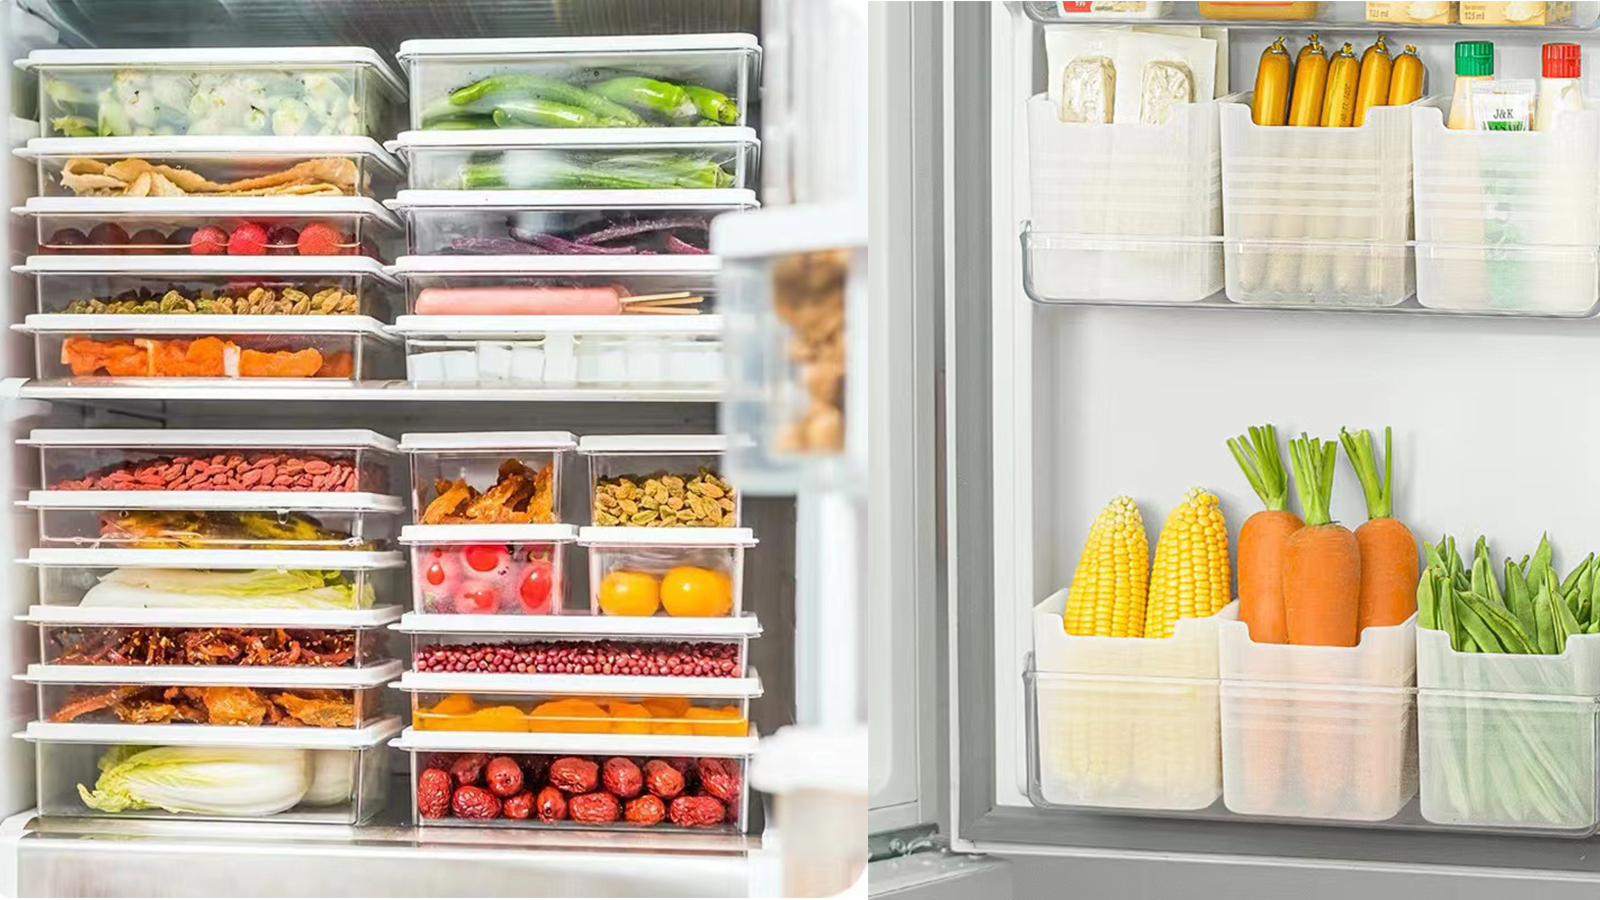 How to use the crisper correctly